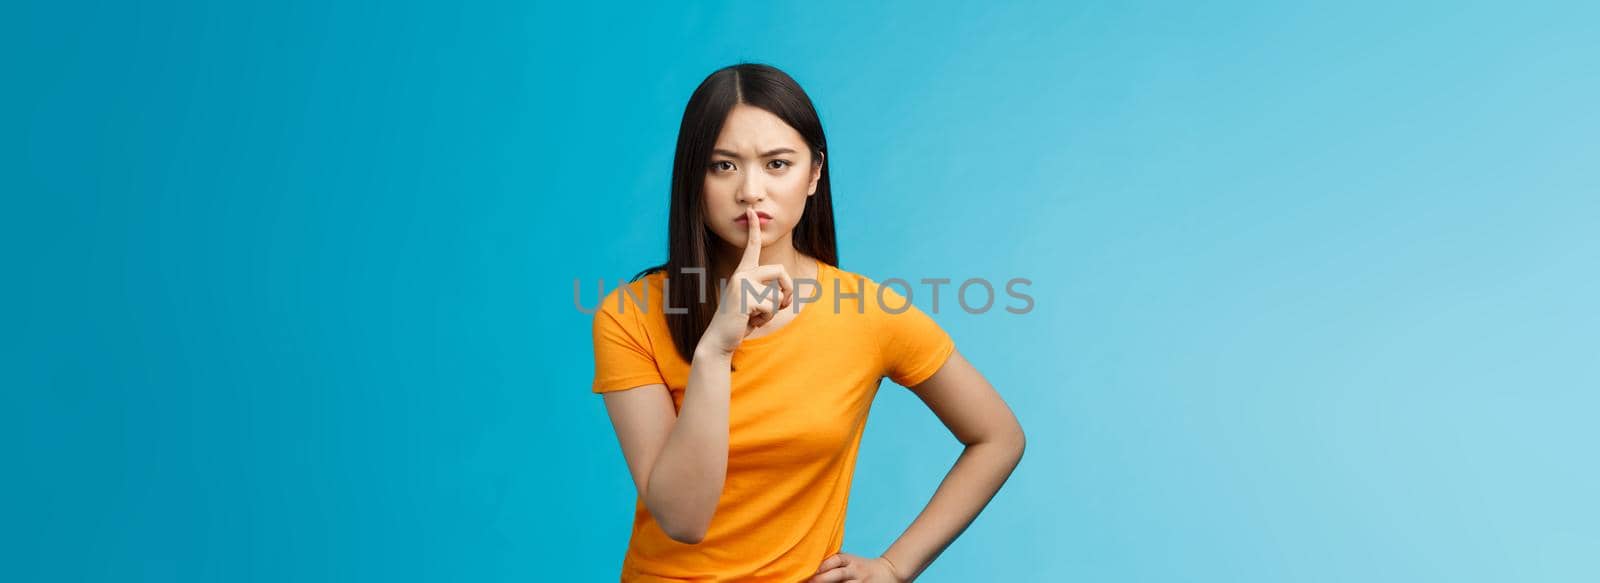 Hush keep quiet, behave well. Serious-looking strict asian elder sister shushing bending towards camera frowning, hold hand waist encouraged, asking not share secret, stand blue background.